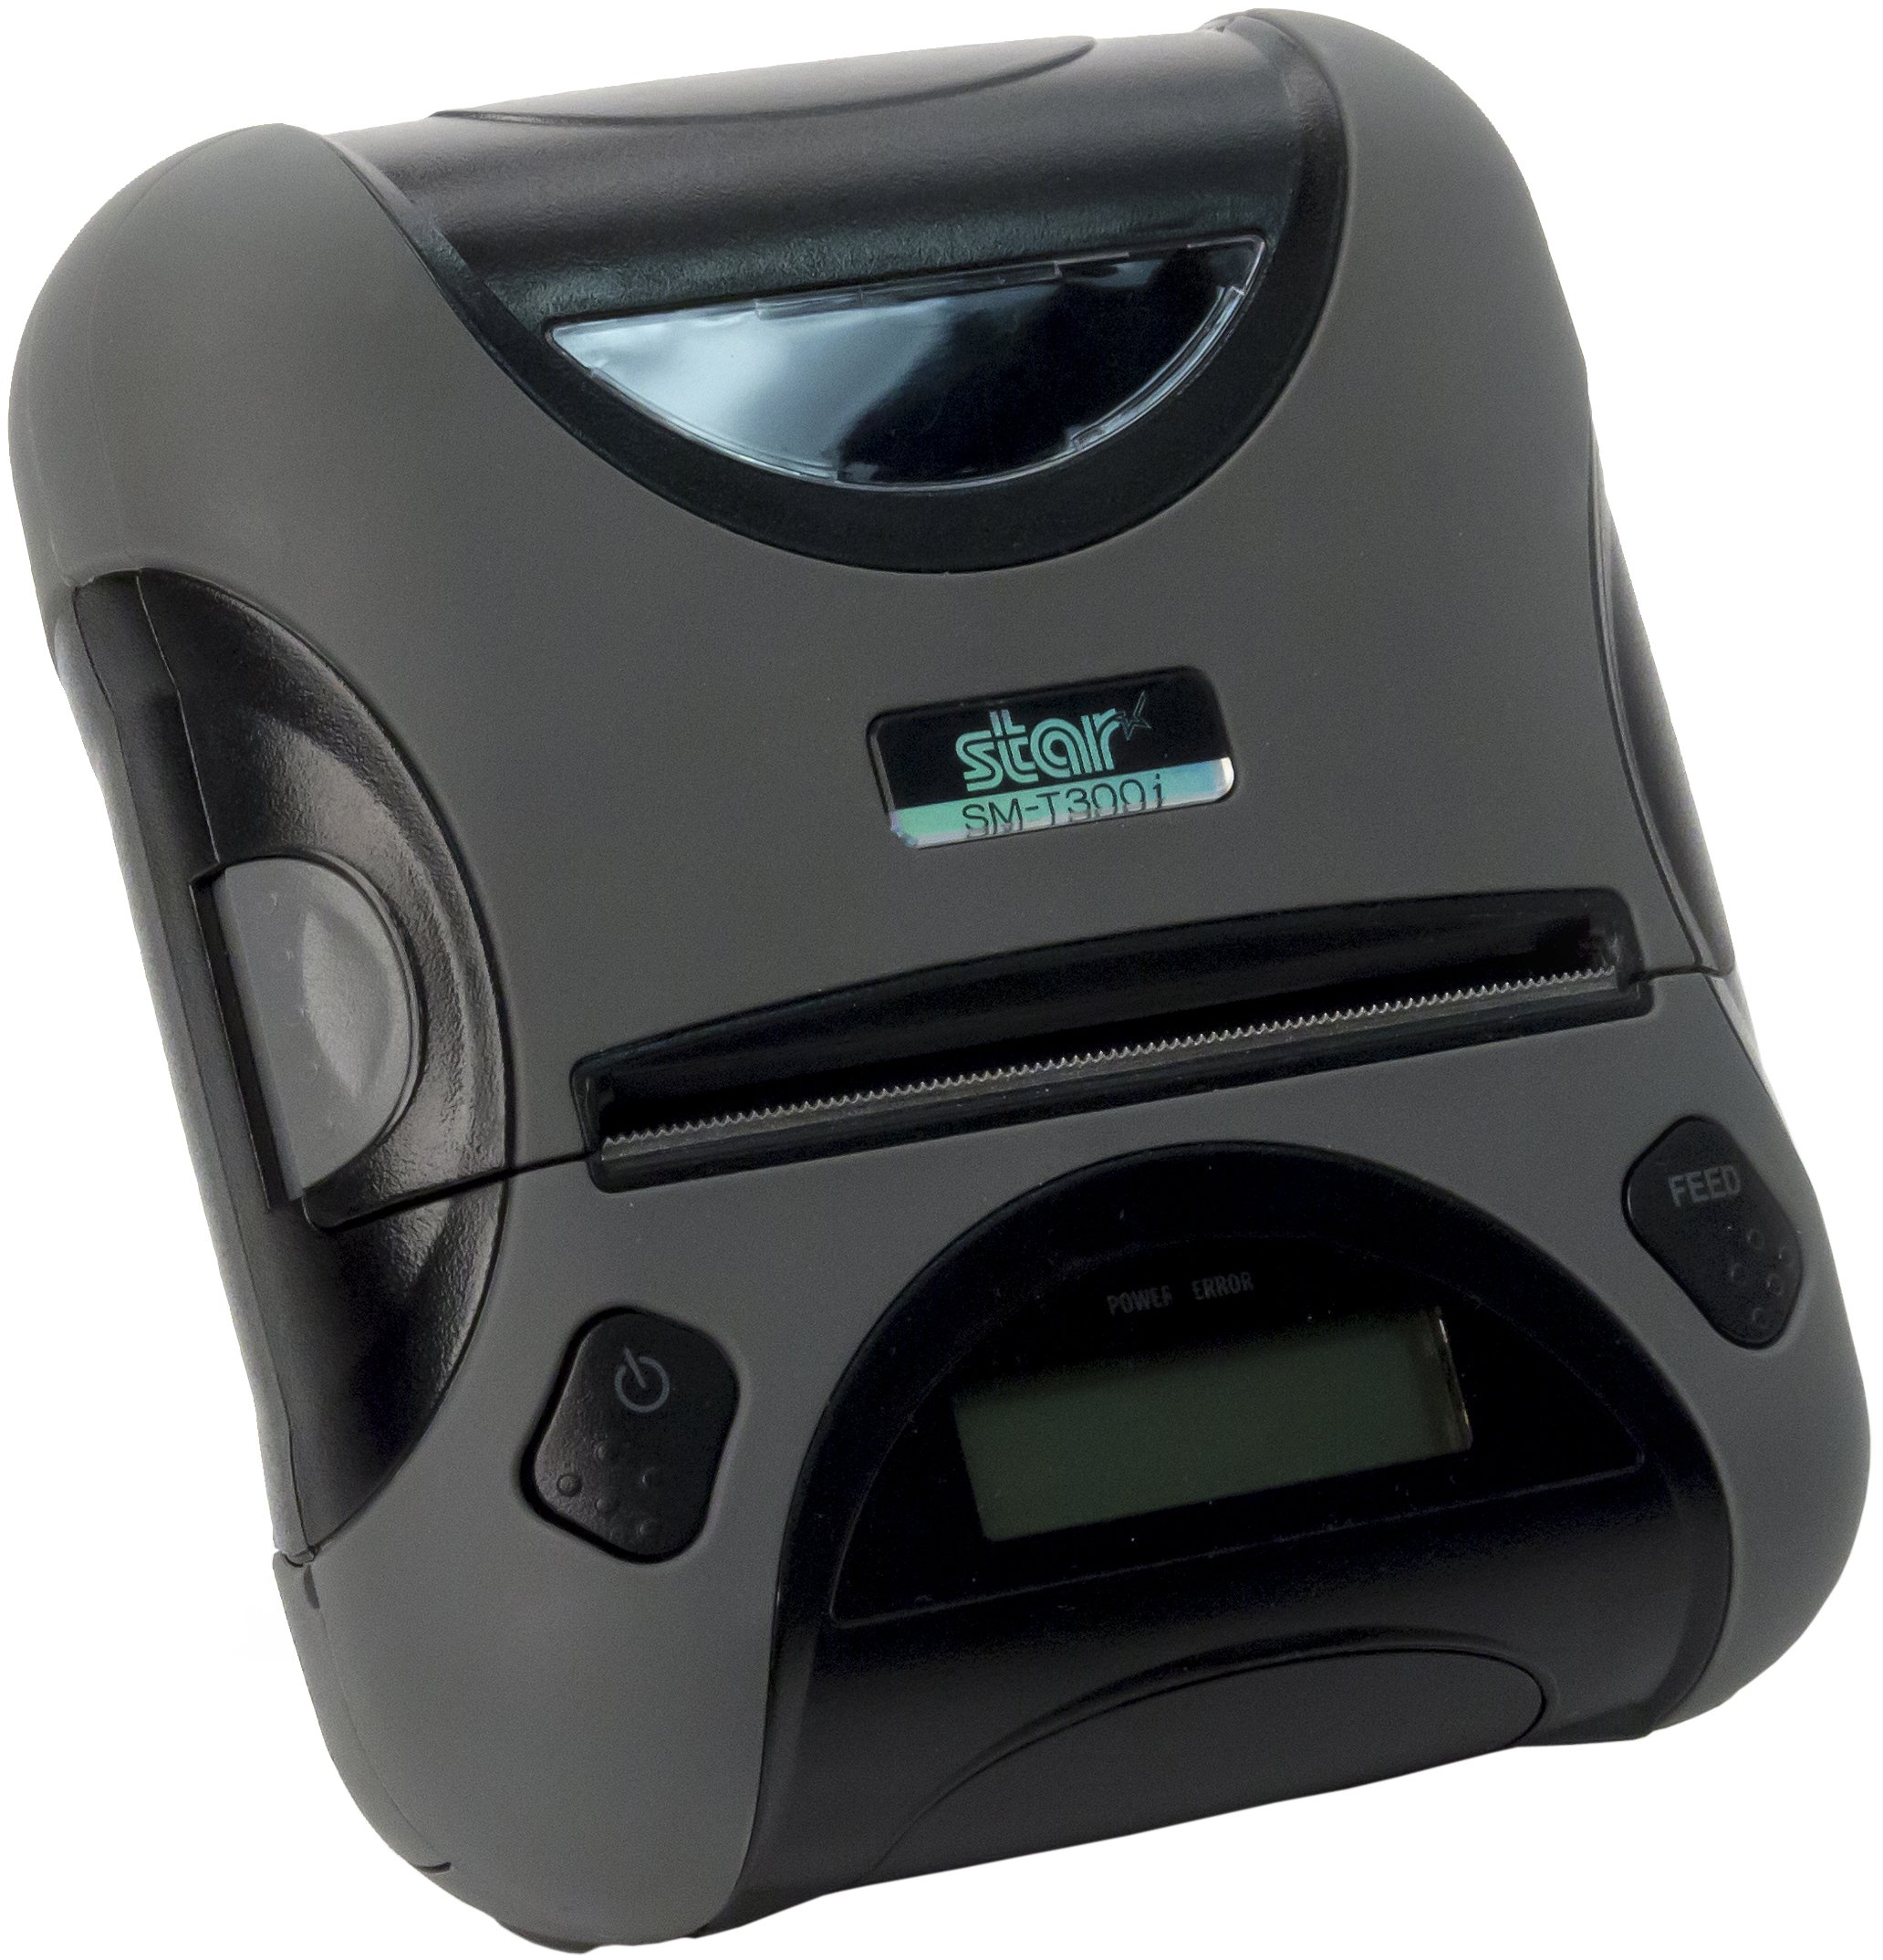 Star Micronics SM-T300i Ultra-Rugged Portable Bluetooth Receipt Printer with Tear Bar - Supports iOS, Android, Windows